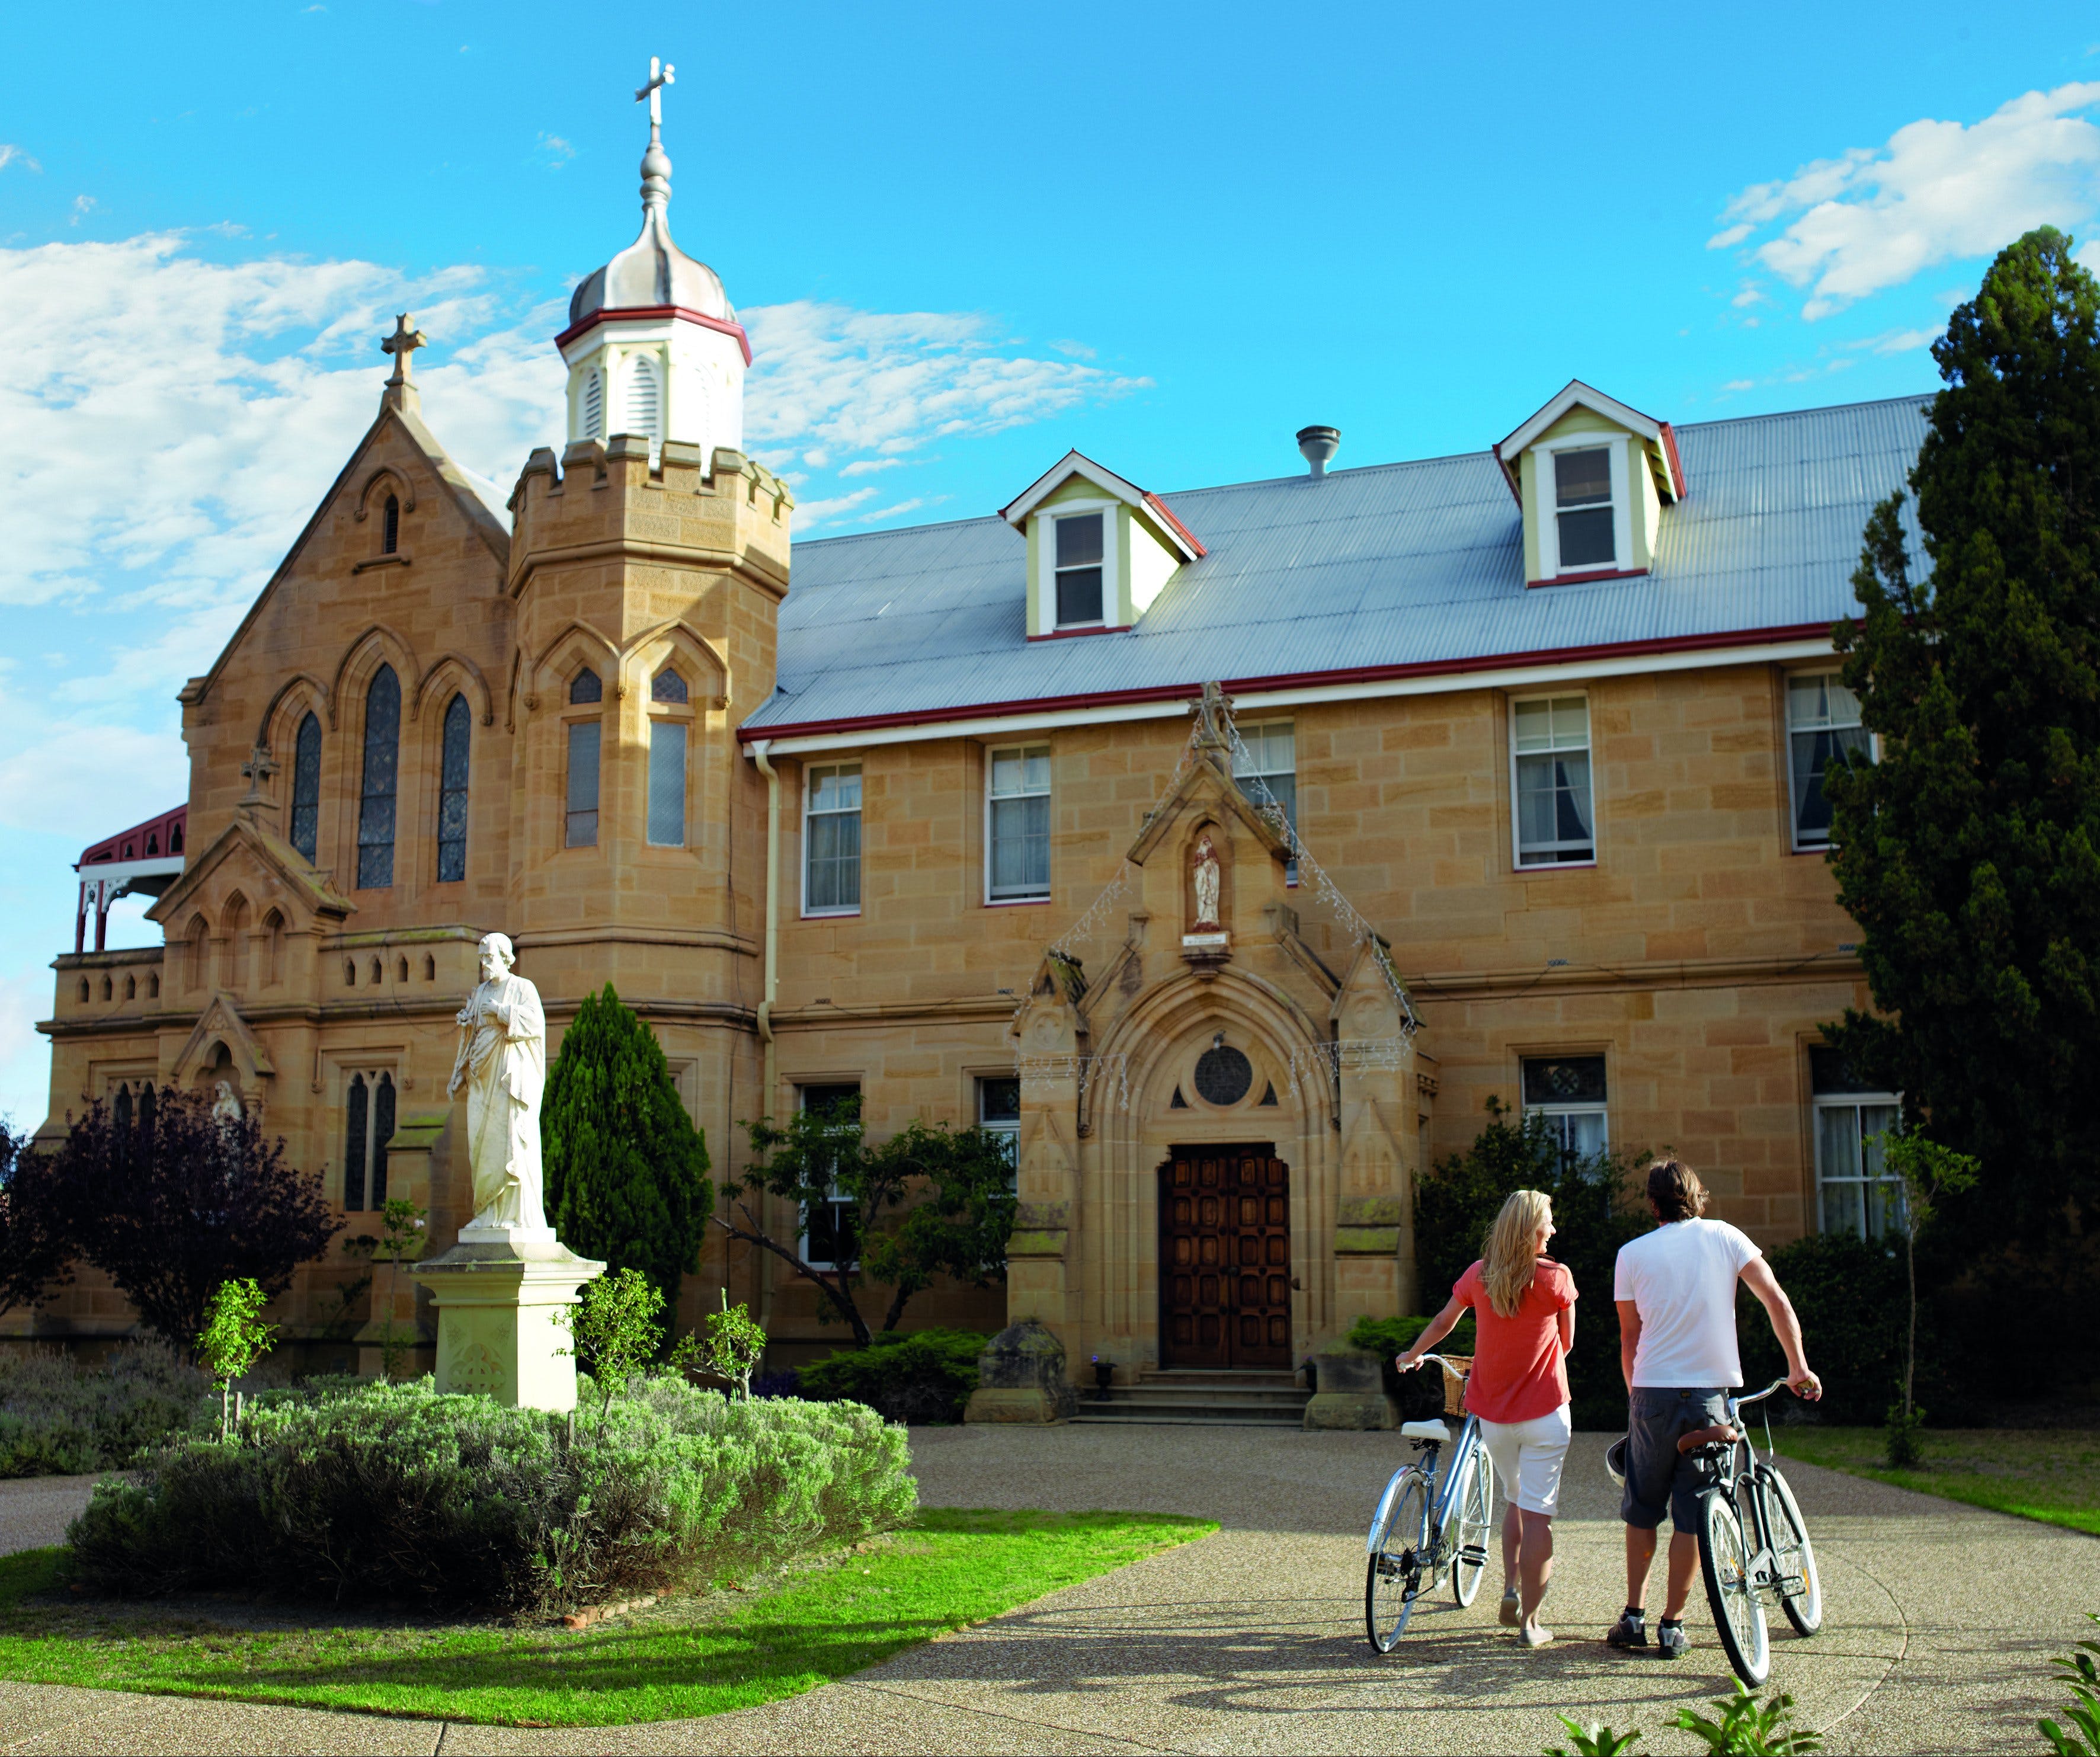 Warwick - Find Attractions